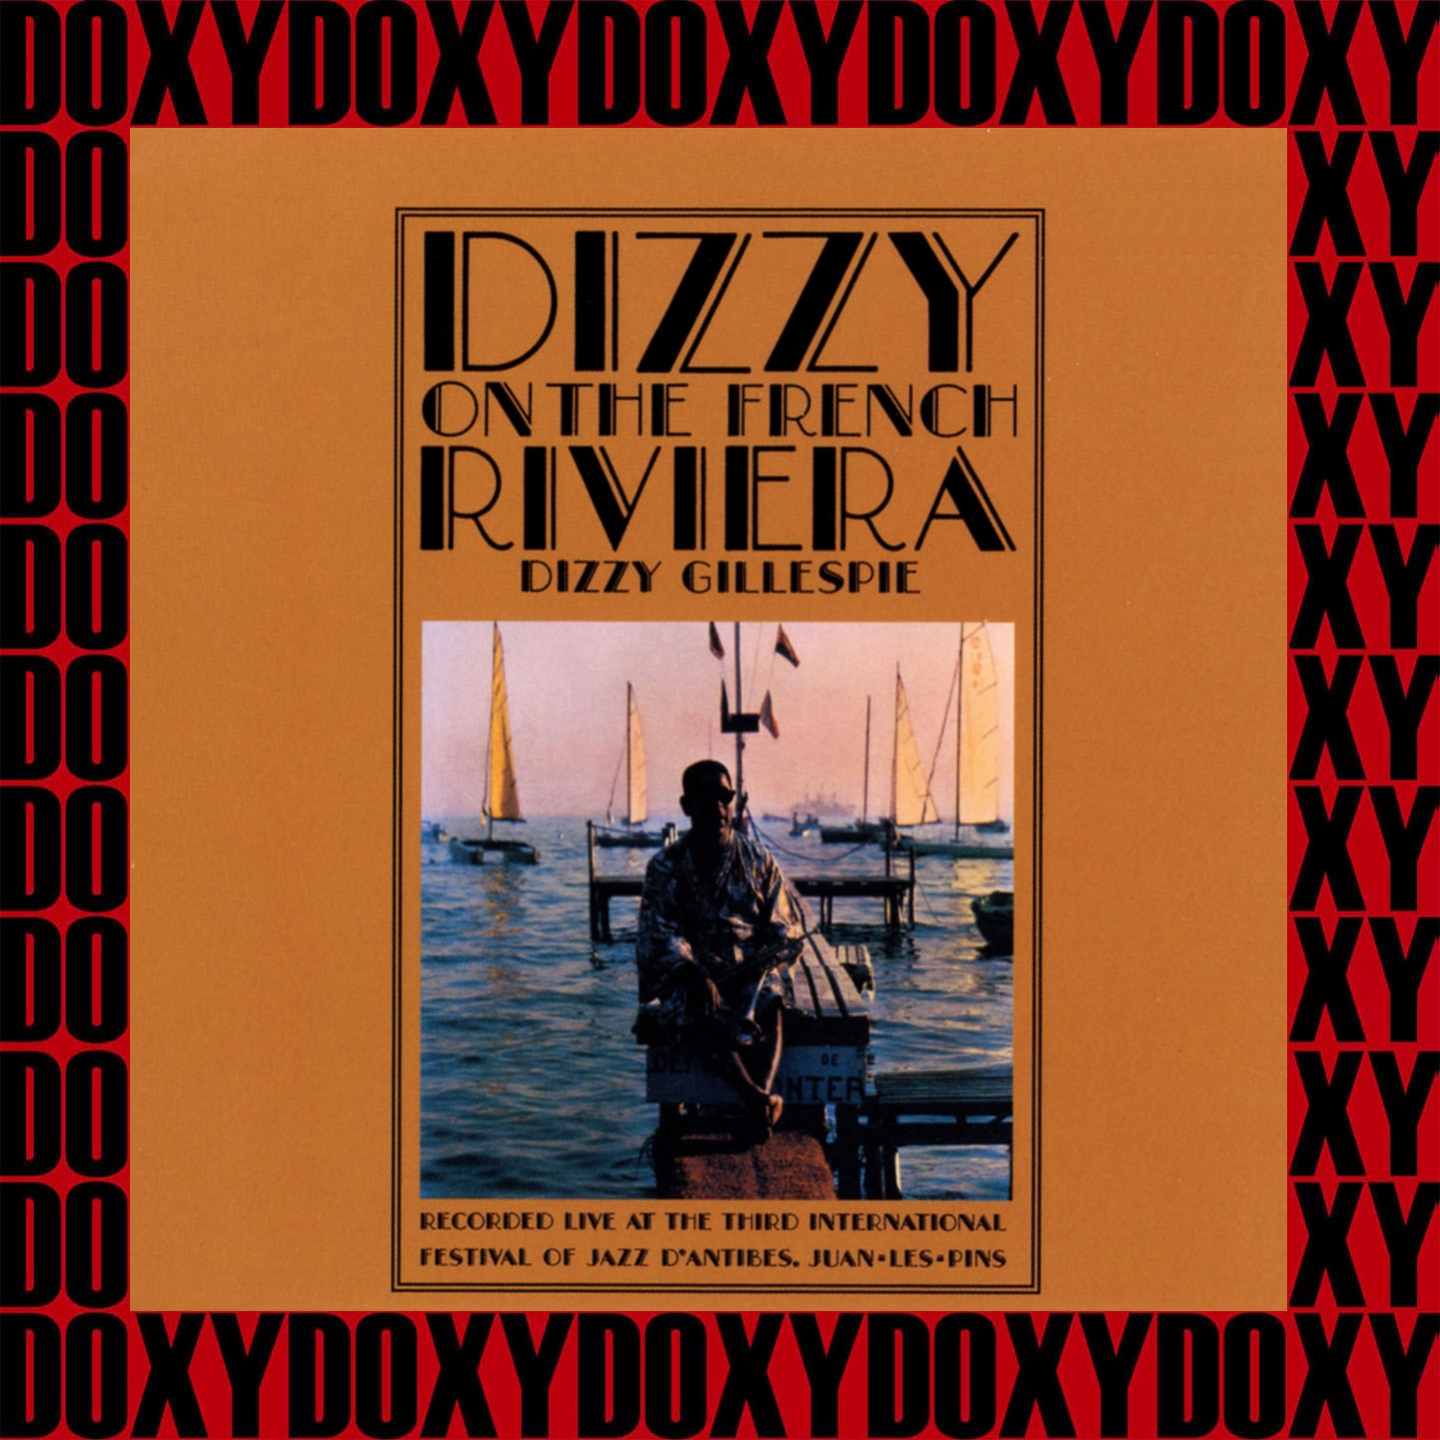 Dizzy On The French Riviera (Remastered Version) (Doxy Collection)